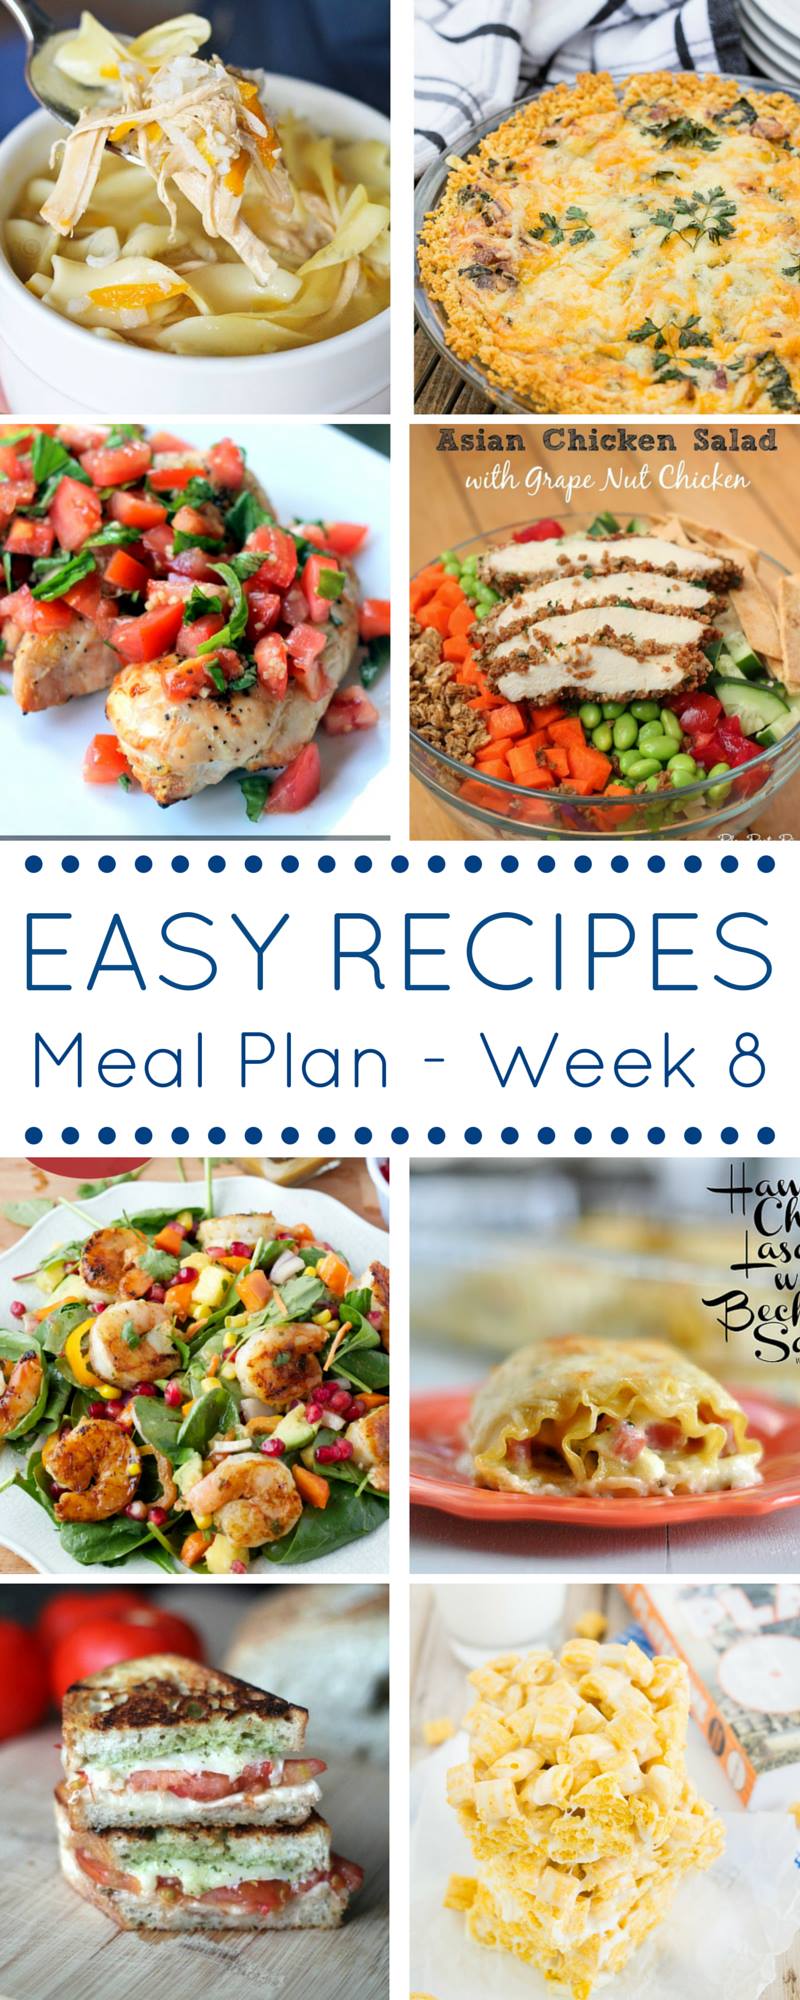 Make getting dinner on the table each night with our weekly easy dinner recipes meal plan. Week 8 is full of delicious options.